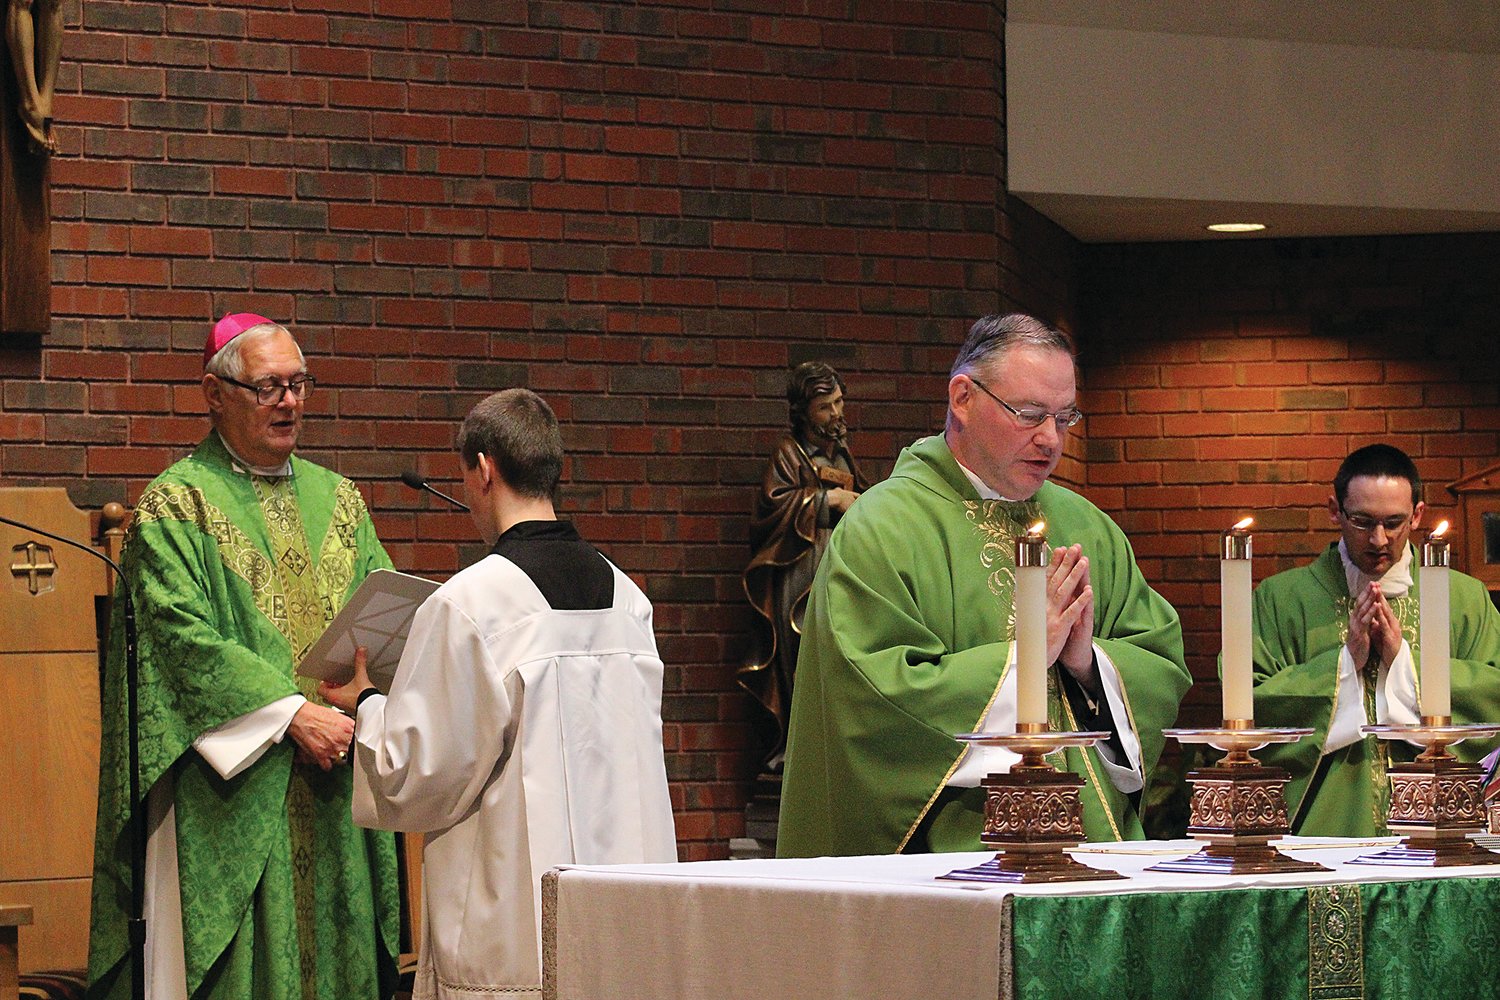 Father Michael McMahon professes his oath at the altar as Bishop Thomas J. Tobin installs him as the new pastor of St. Philip’s Church, with Assistant Pastor  Father Phillip Dufour, at right.